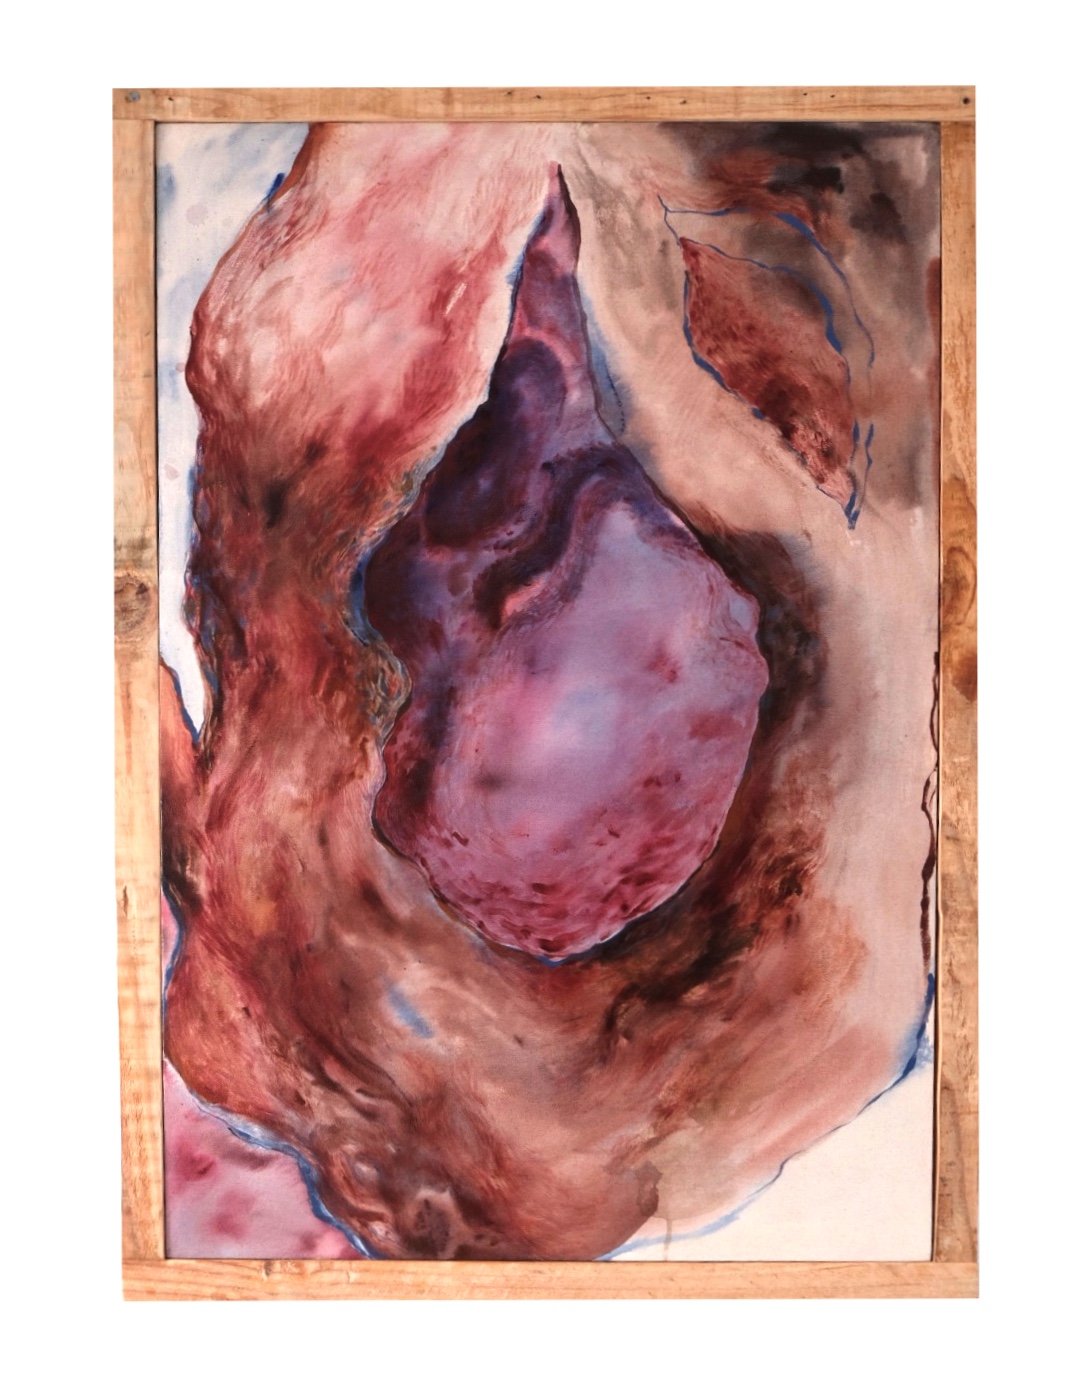   Fire in Her Loins,  2020, Acrylic on canvas, handmade repurposed wood frame. 86cm x 121cm.  